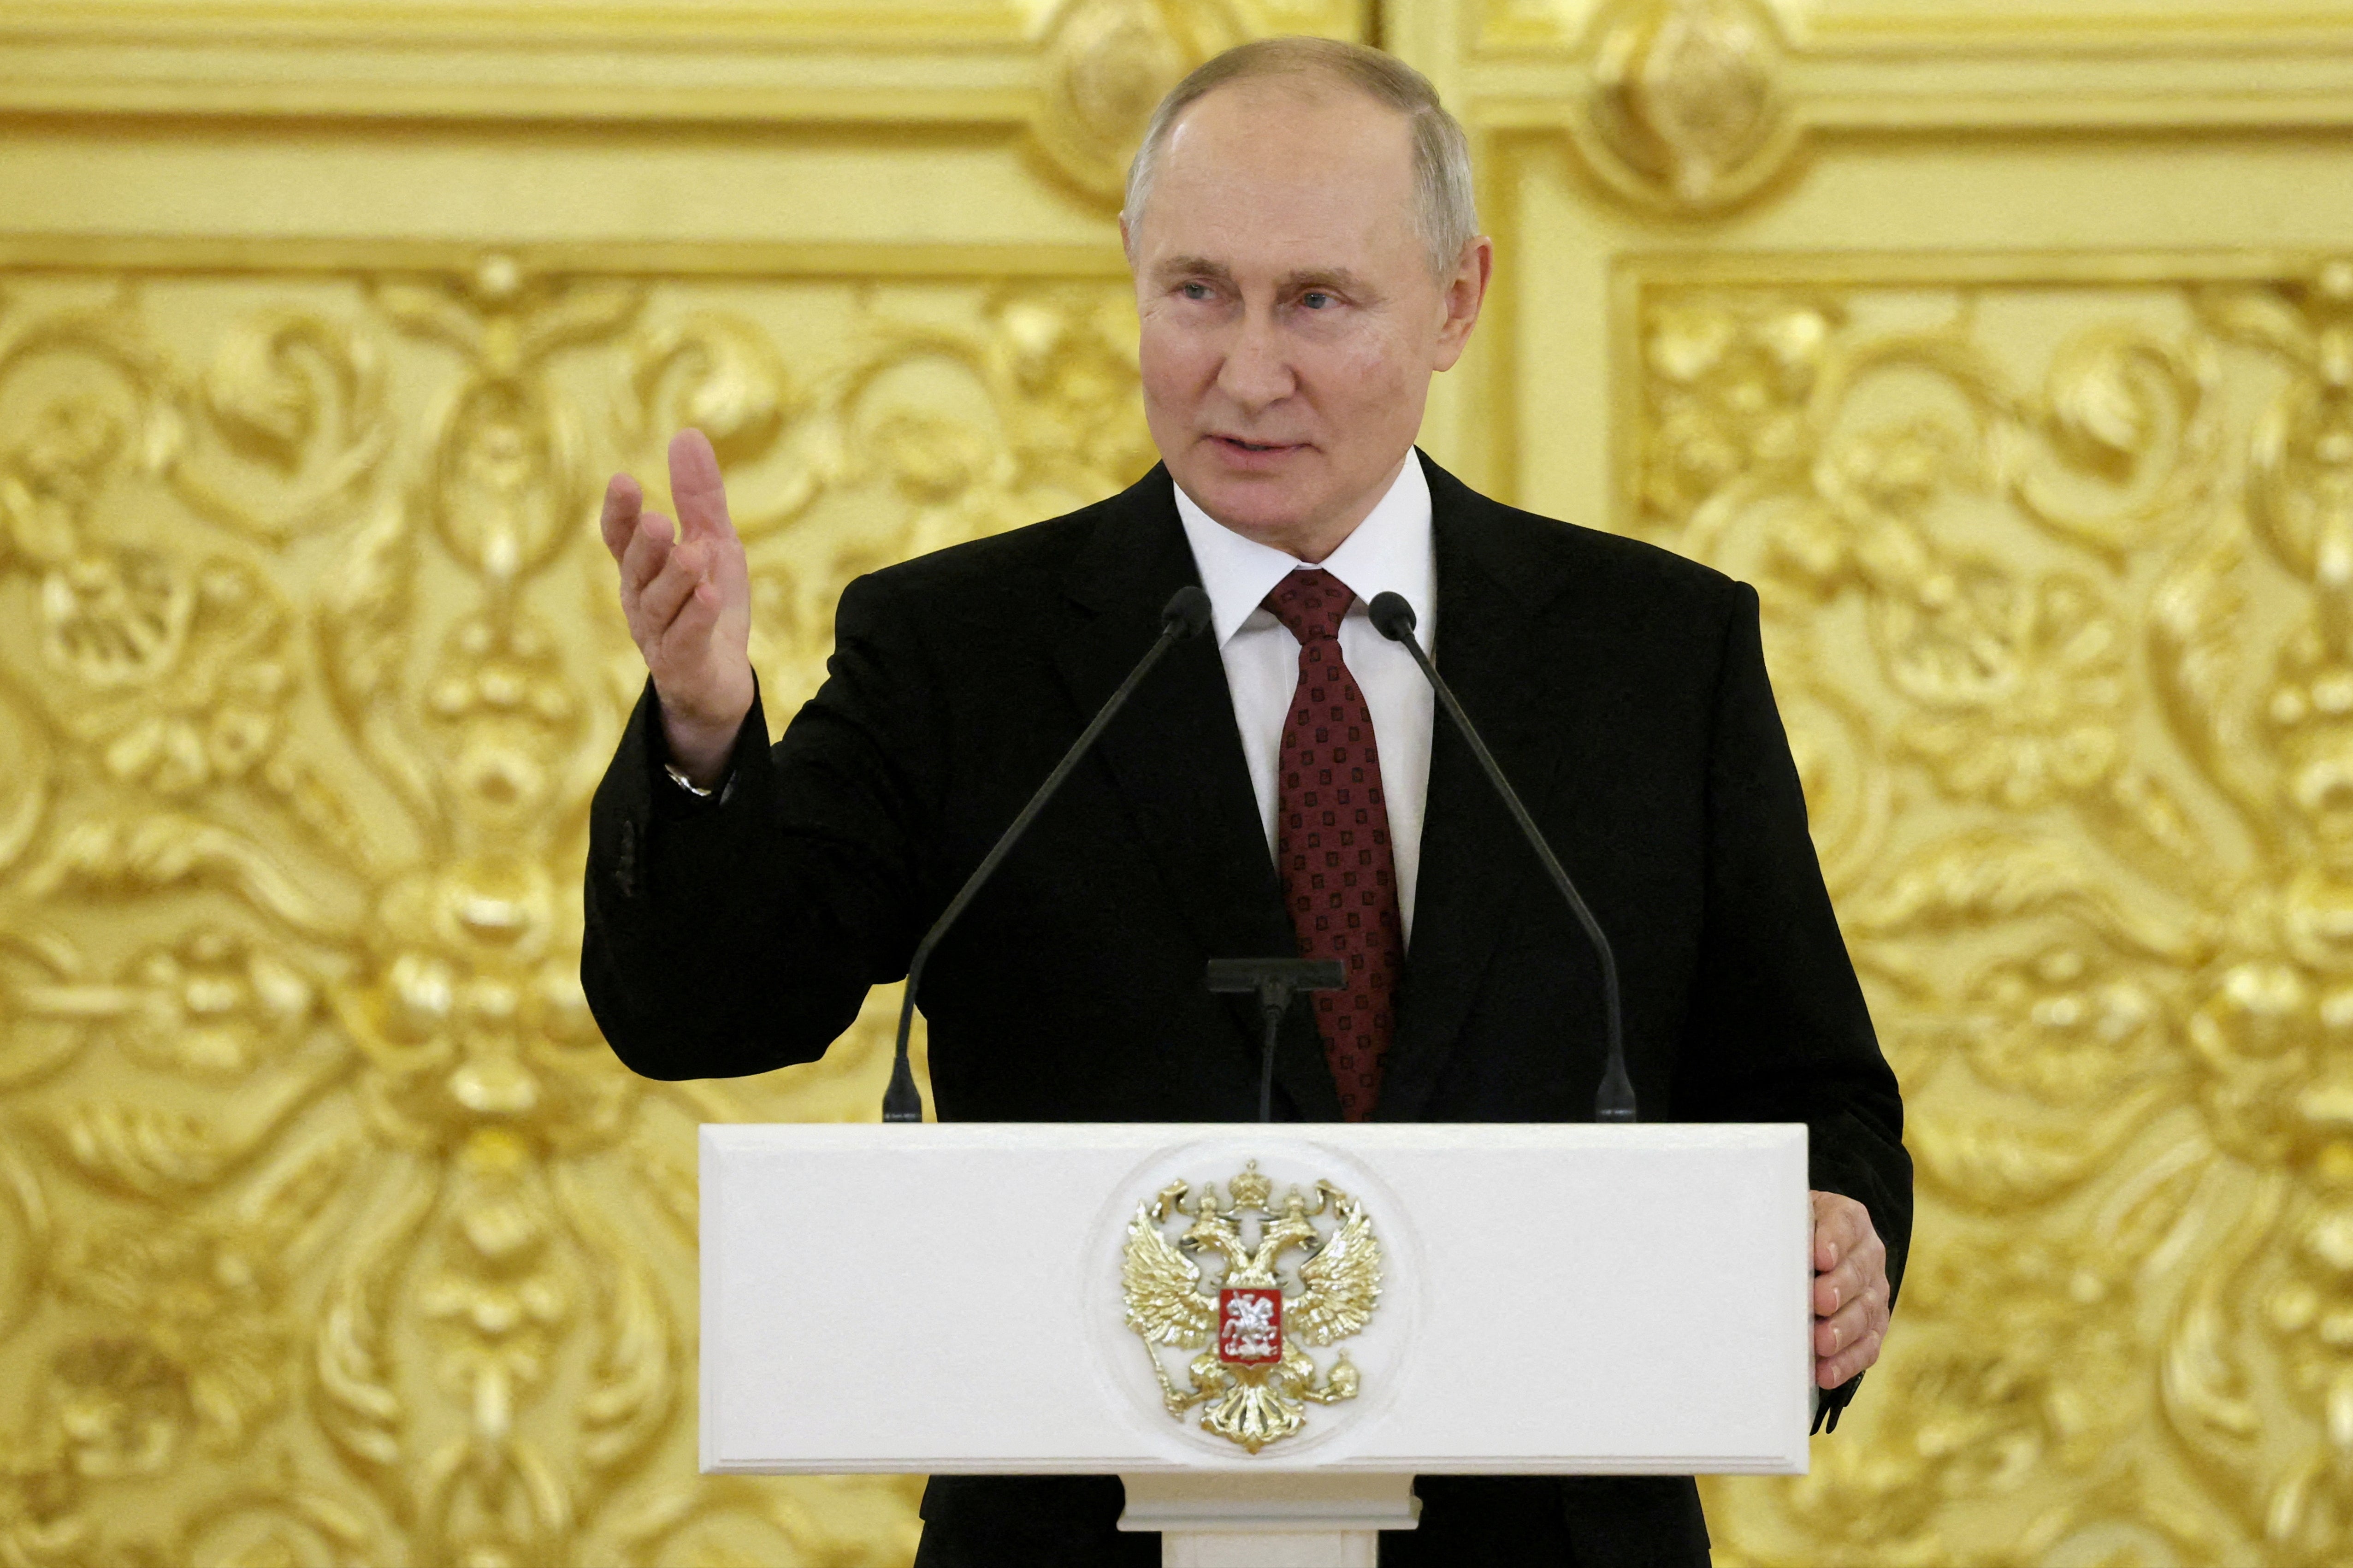 <p>Vladimir Putin speaks at a ceremony to receive diplomatic credentials from newly appointed foreign ambassadors at the Grand Kremlin Palace in Moscow</p>